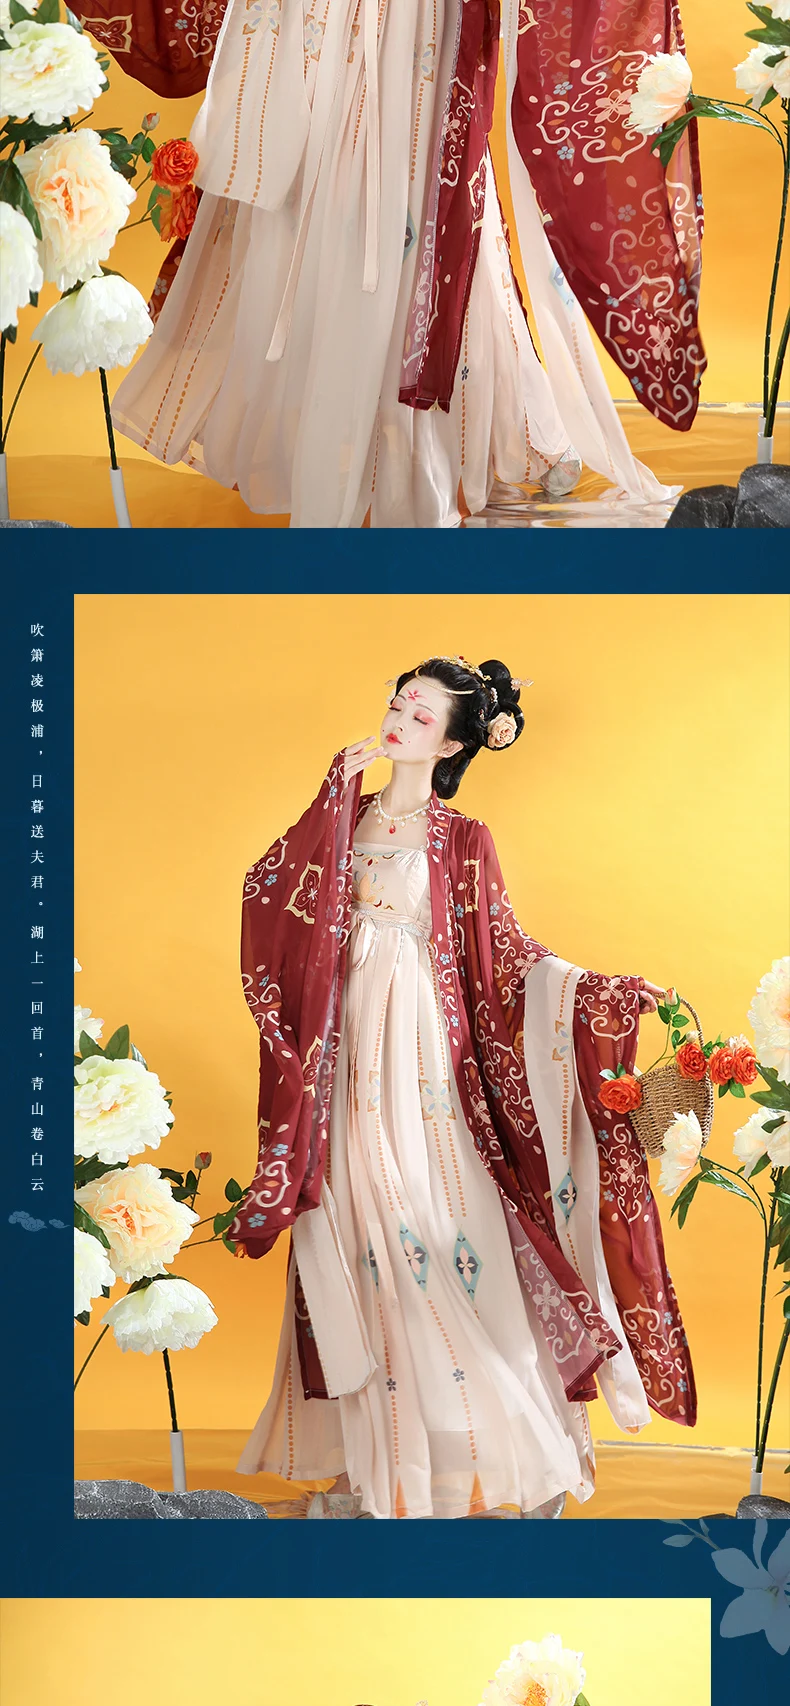 Women Hanfu Traditional Chinese Clothing Festival Outfit Fairy Embroidery